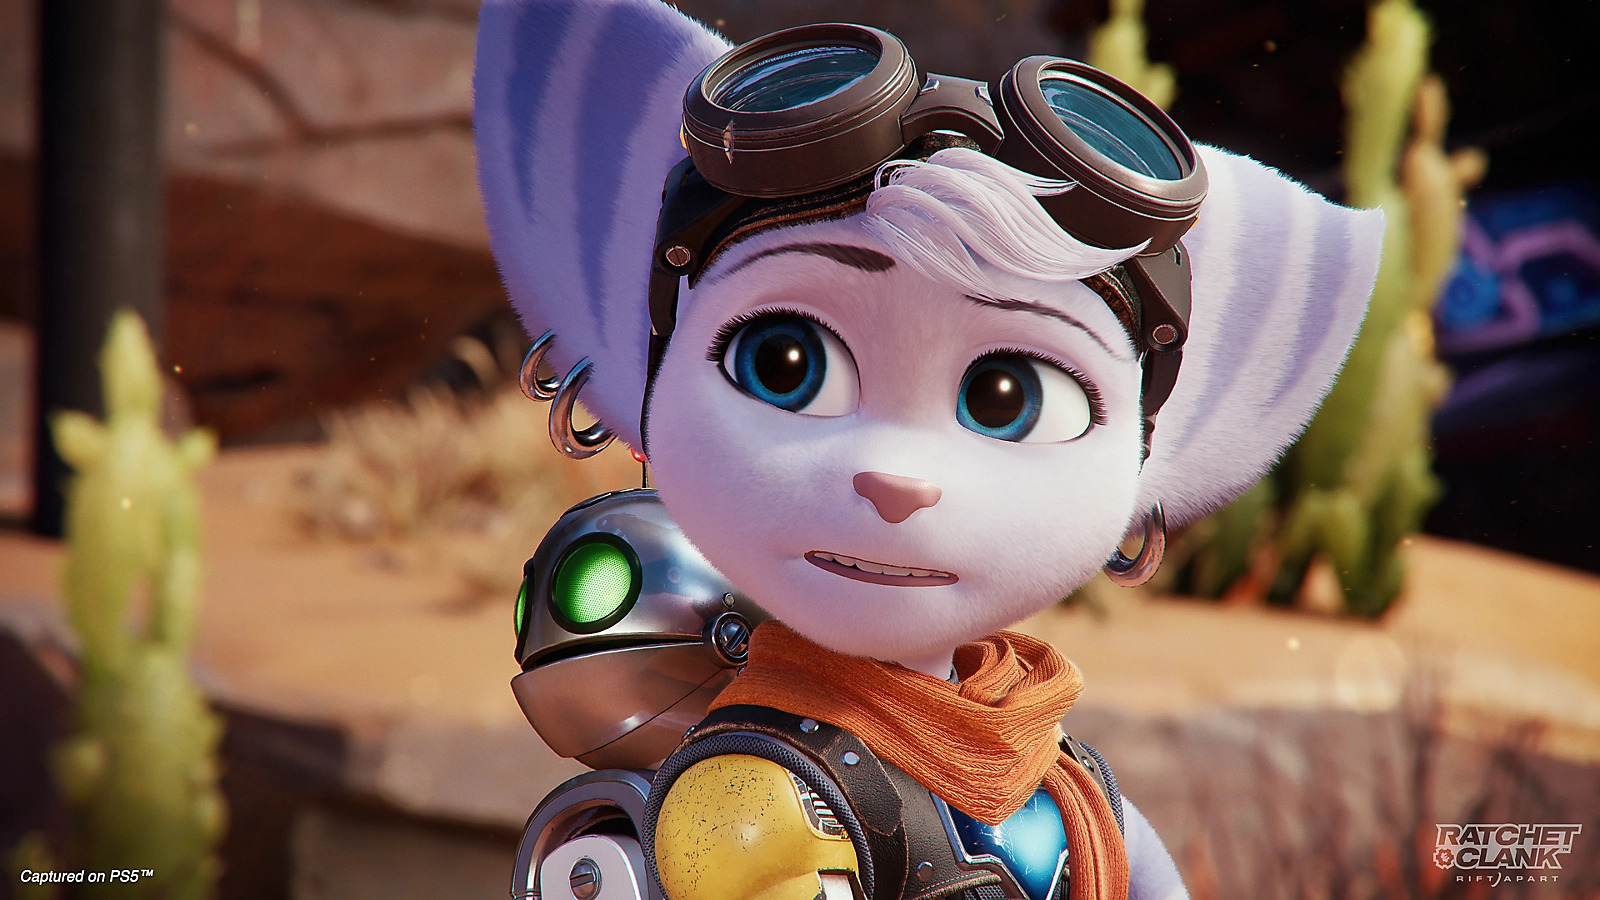 Ratchet & Clank: Rift Apart is coming to PC on July 26